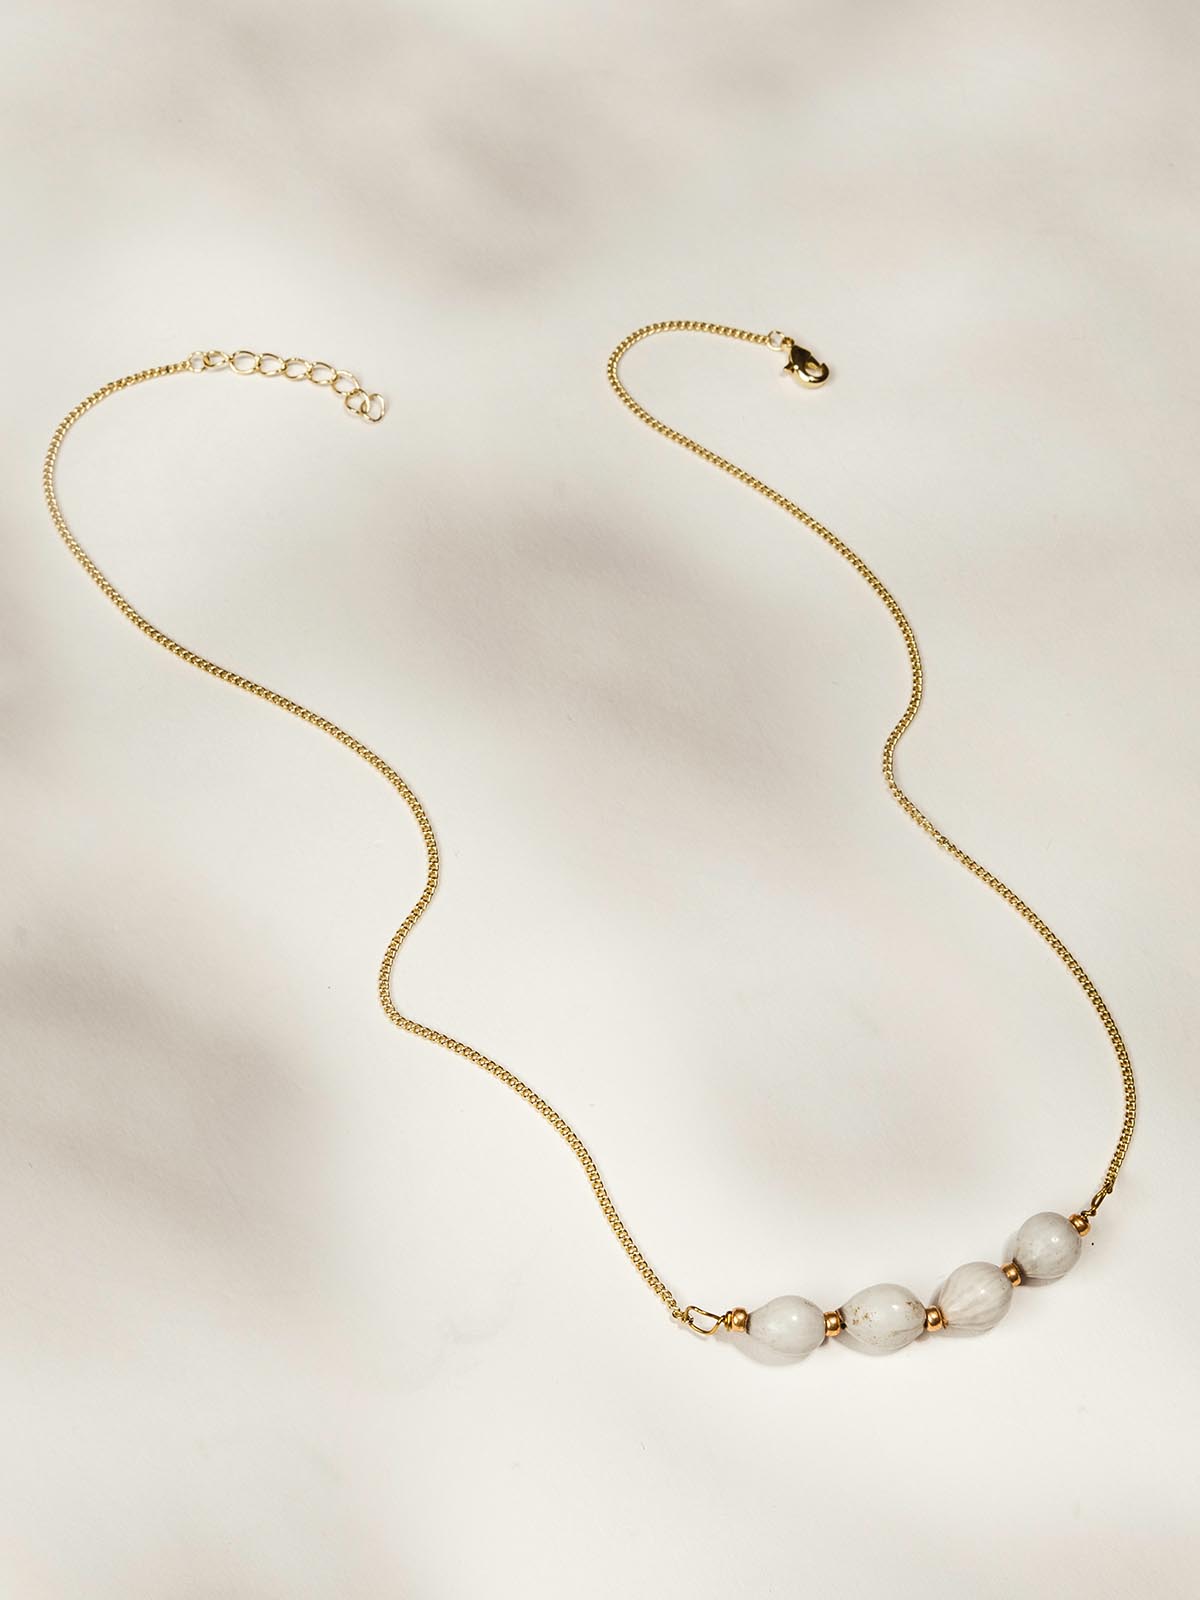 Gold necklace with four white beads